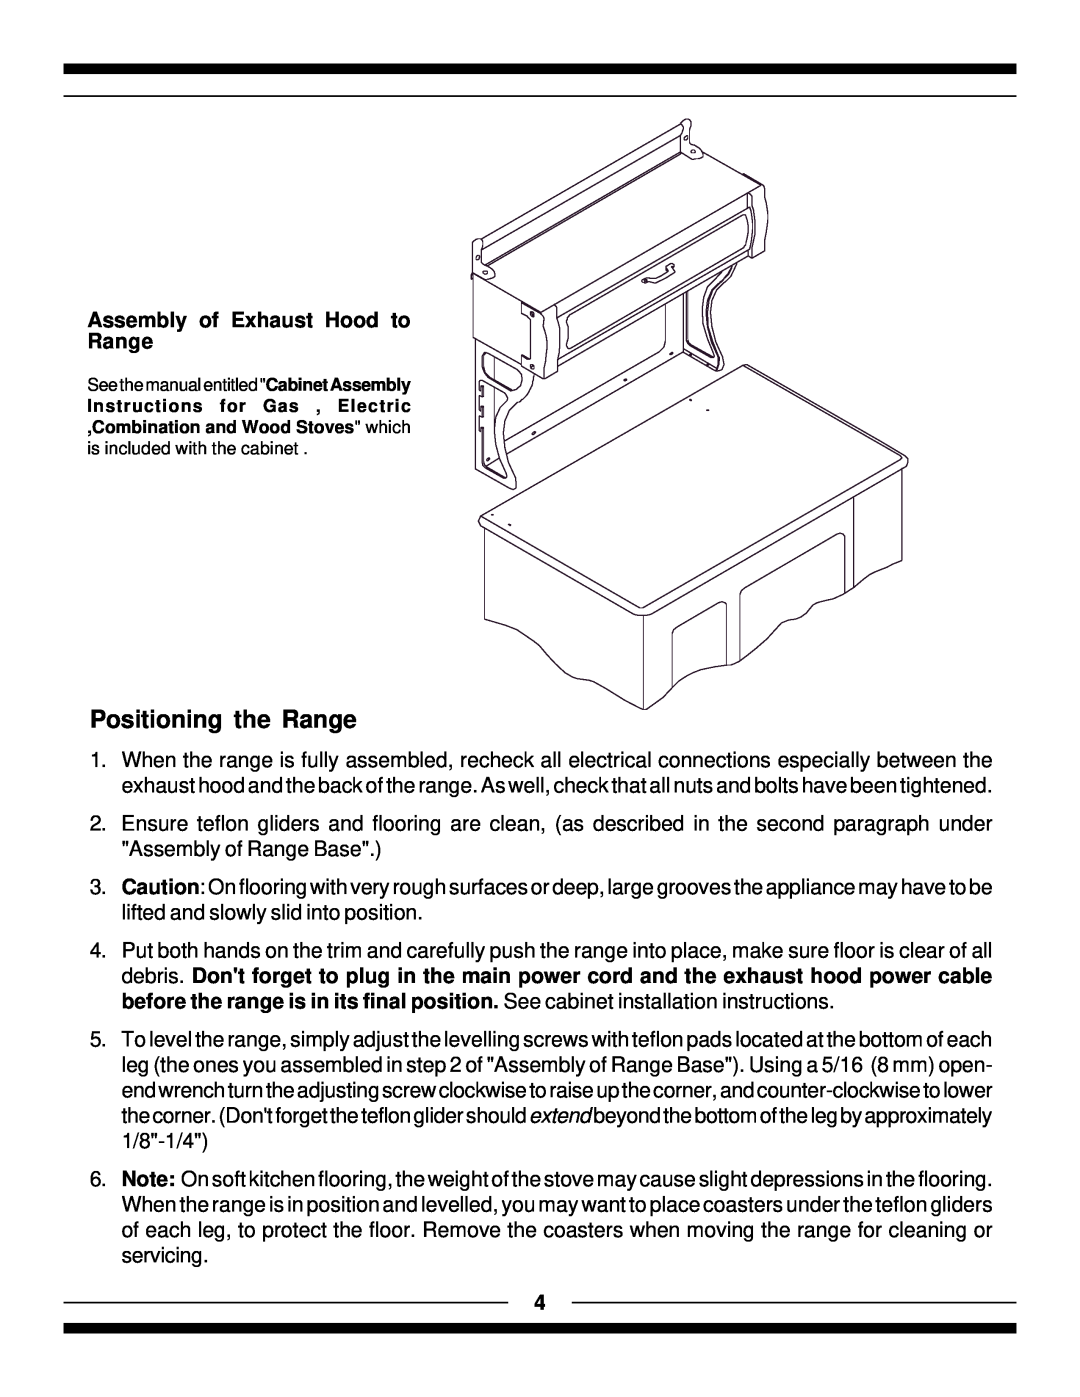 Hearth and Home Technologies 7100, 9100 manual Positioning the Range, Assembly of Exhaust Hood to Range 